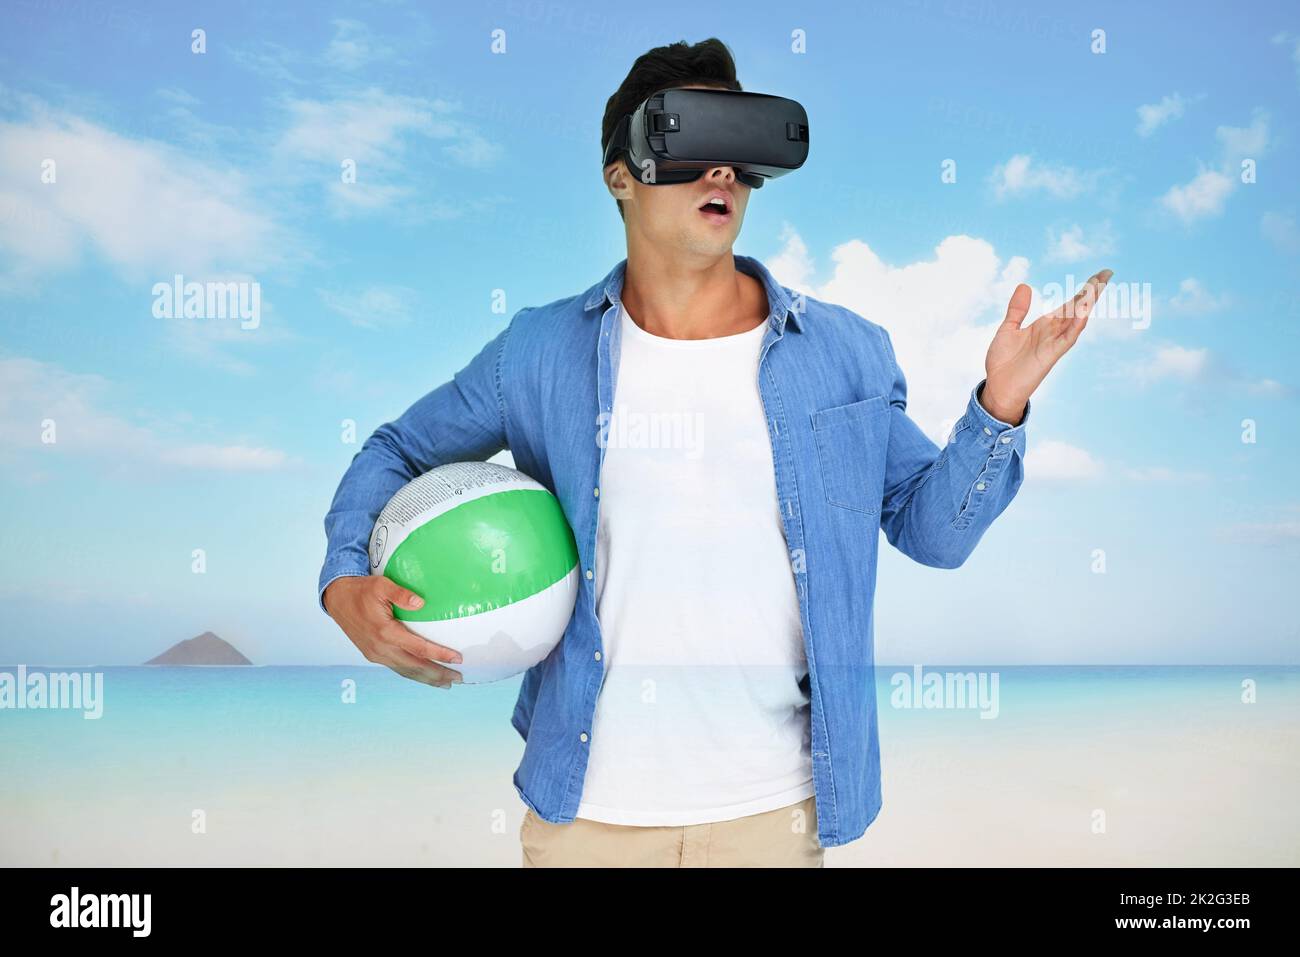 Its the getaway of my dreams. Shot of a young man wearing a VR headset superimposed over a beach landscape. Stock Photo